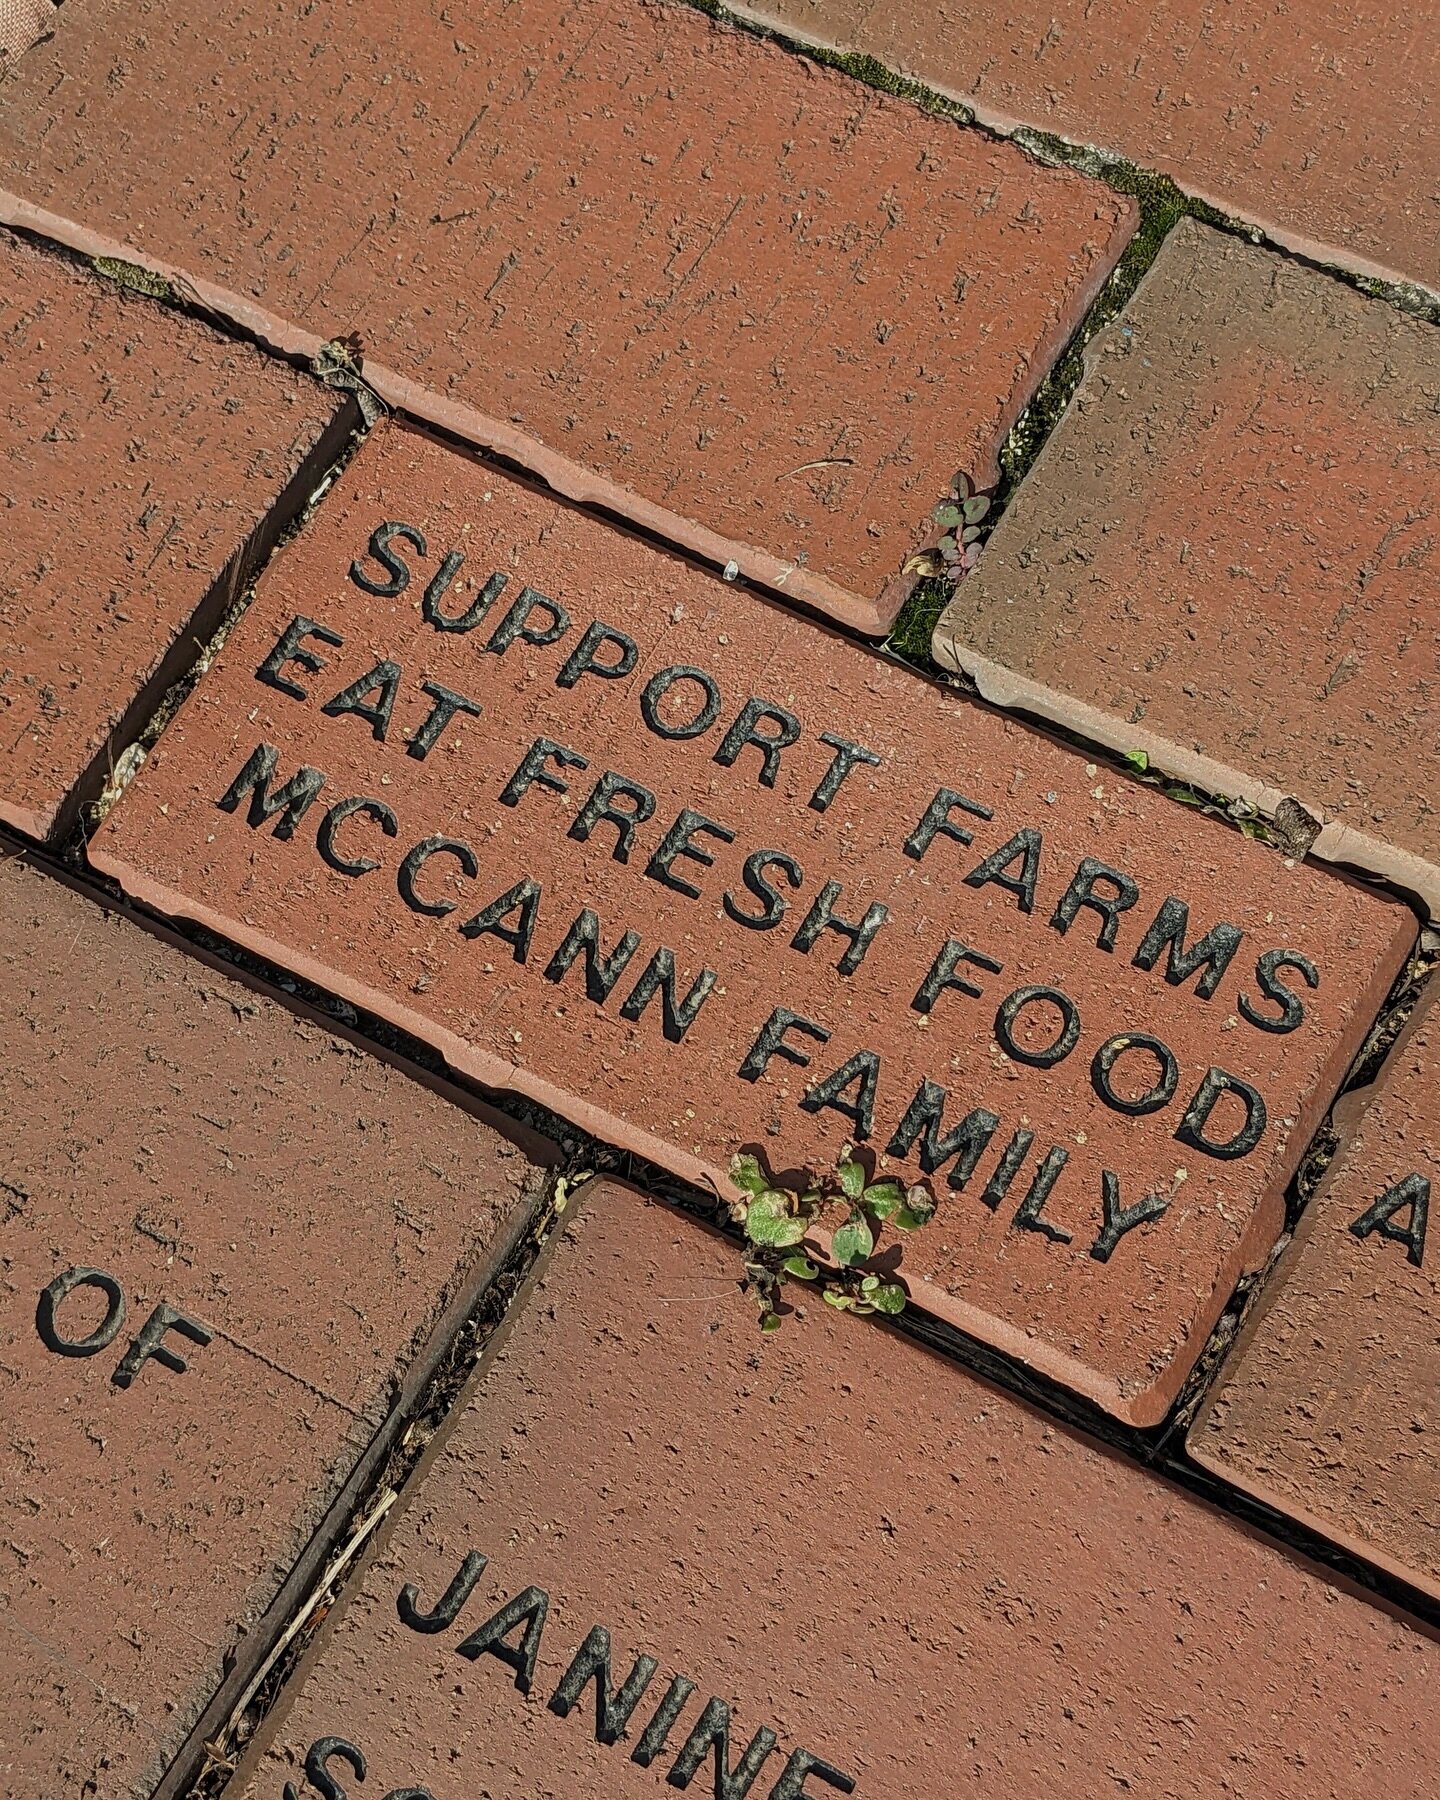 Leave your mark at the Market with an engraved brick!

Many of the property&rsquo;s bricks include personalized messages from vendors and market-goers alike.

To leave your permanent mark this spring, purchase a brick by Monday, April 22nd!

The Engr